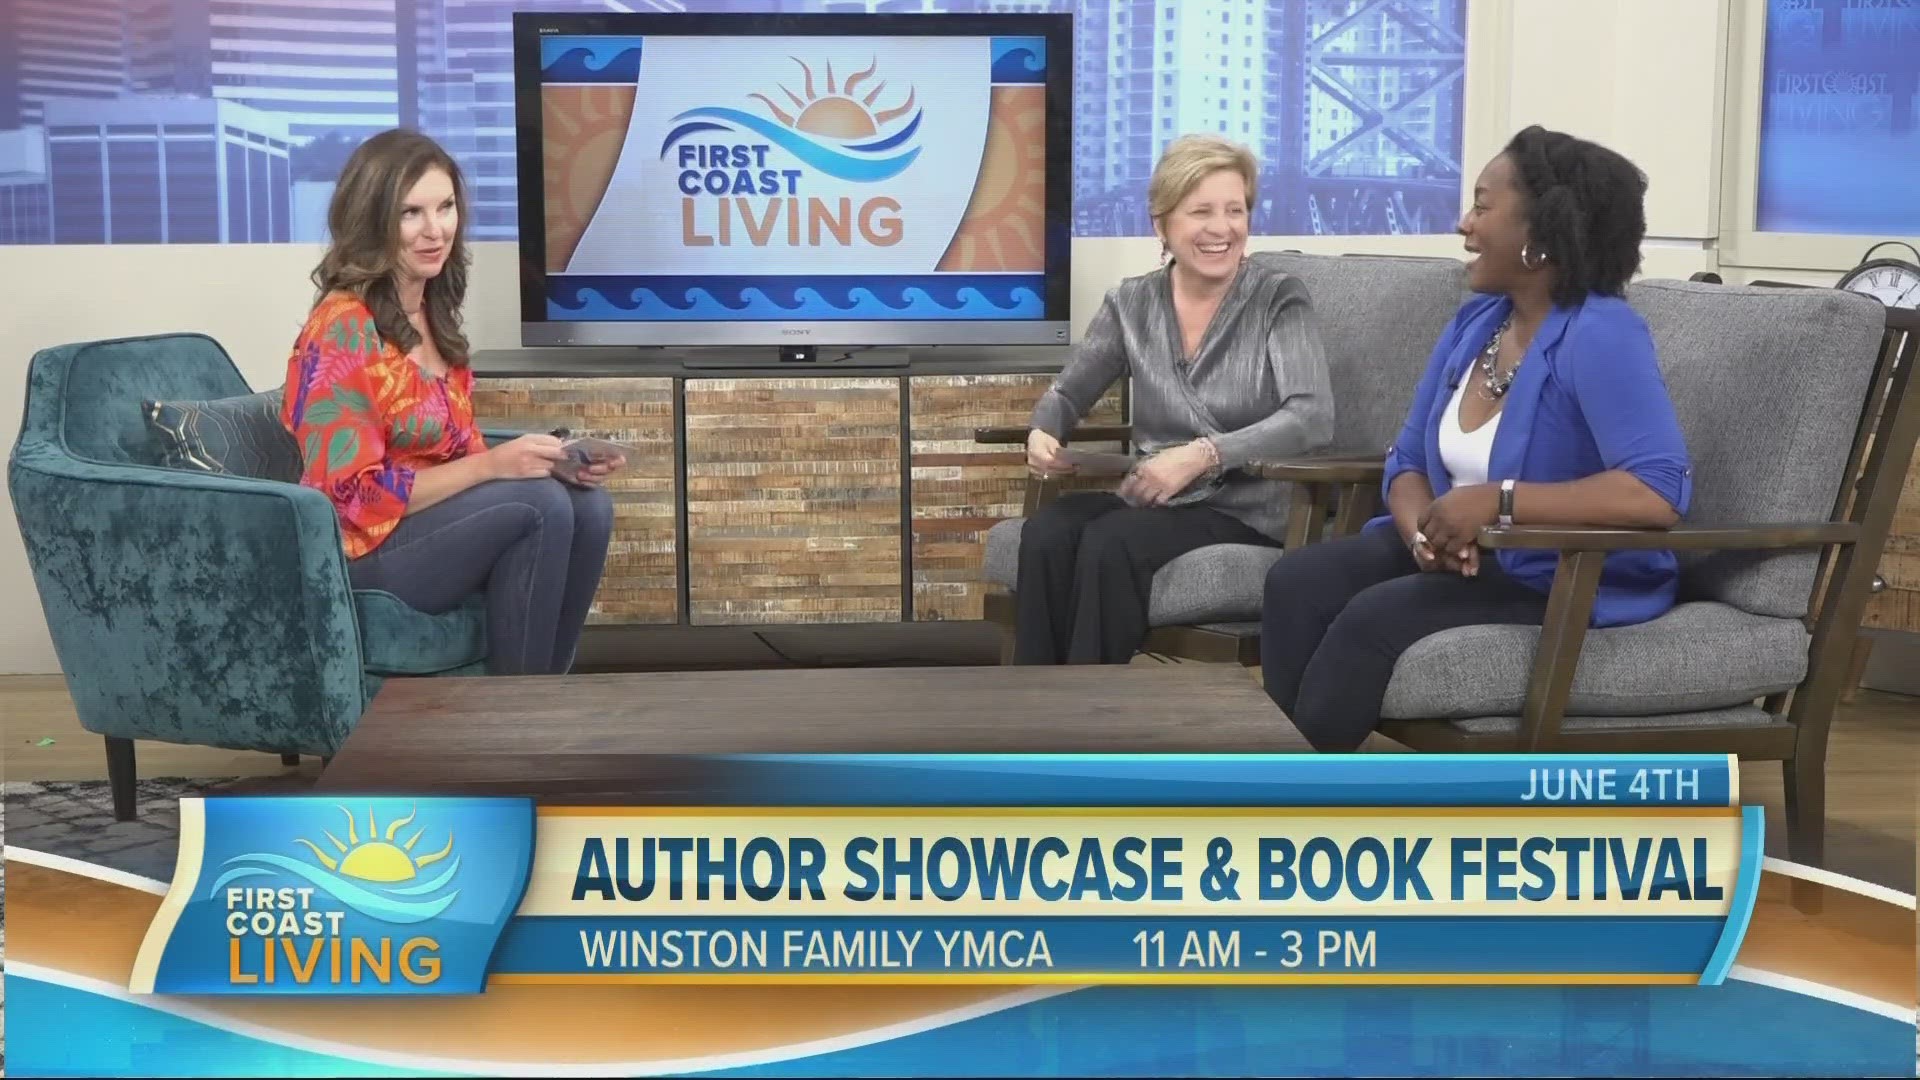 The second annual Author Showcase and Book Festival for Women Writers will take place June 4th on the campus of the Winston Family YMCA from 11 a.m. to 3 p.m.